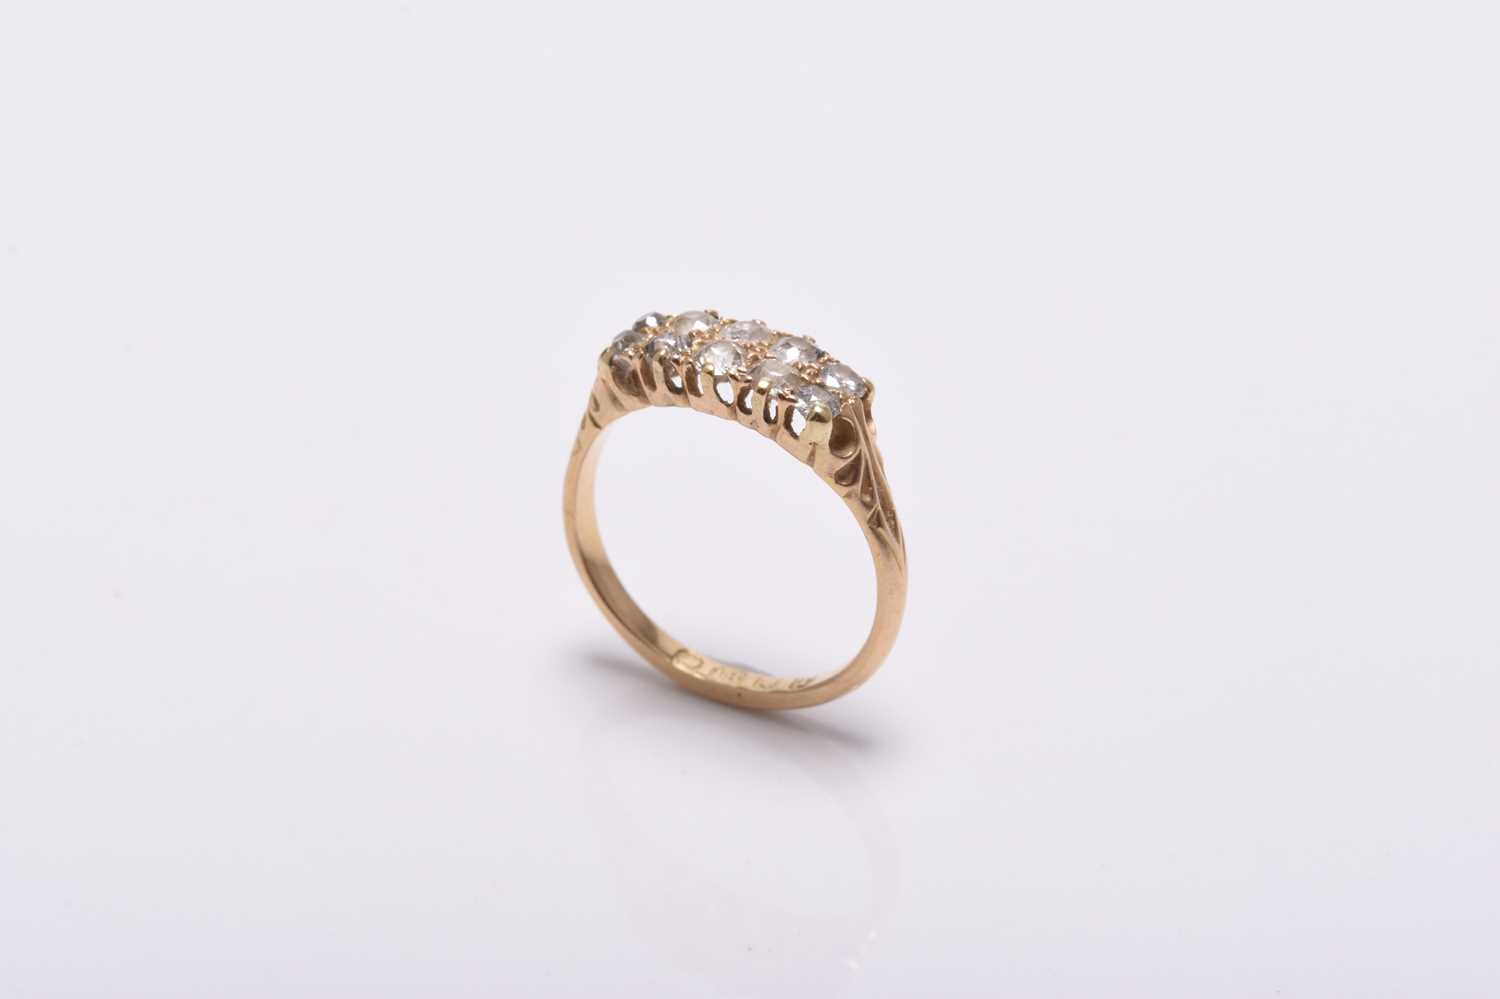 A late 19th century 18ct gold diamond ring